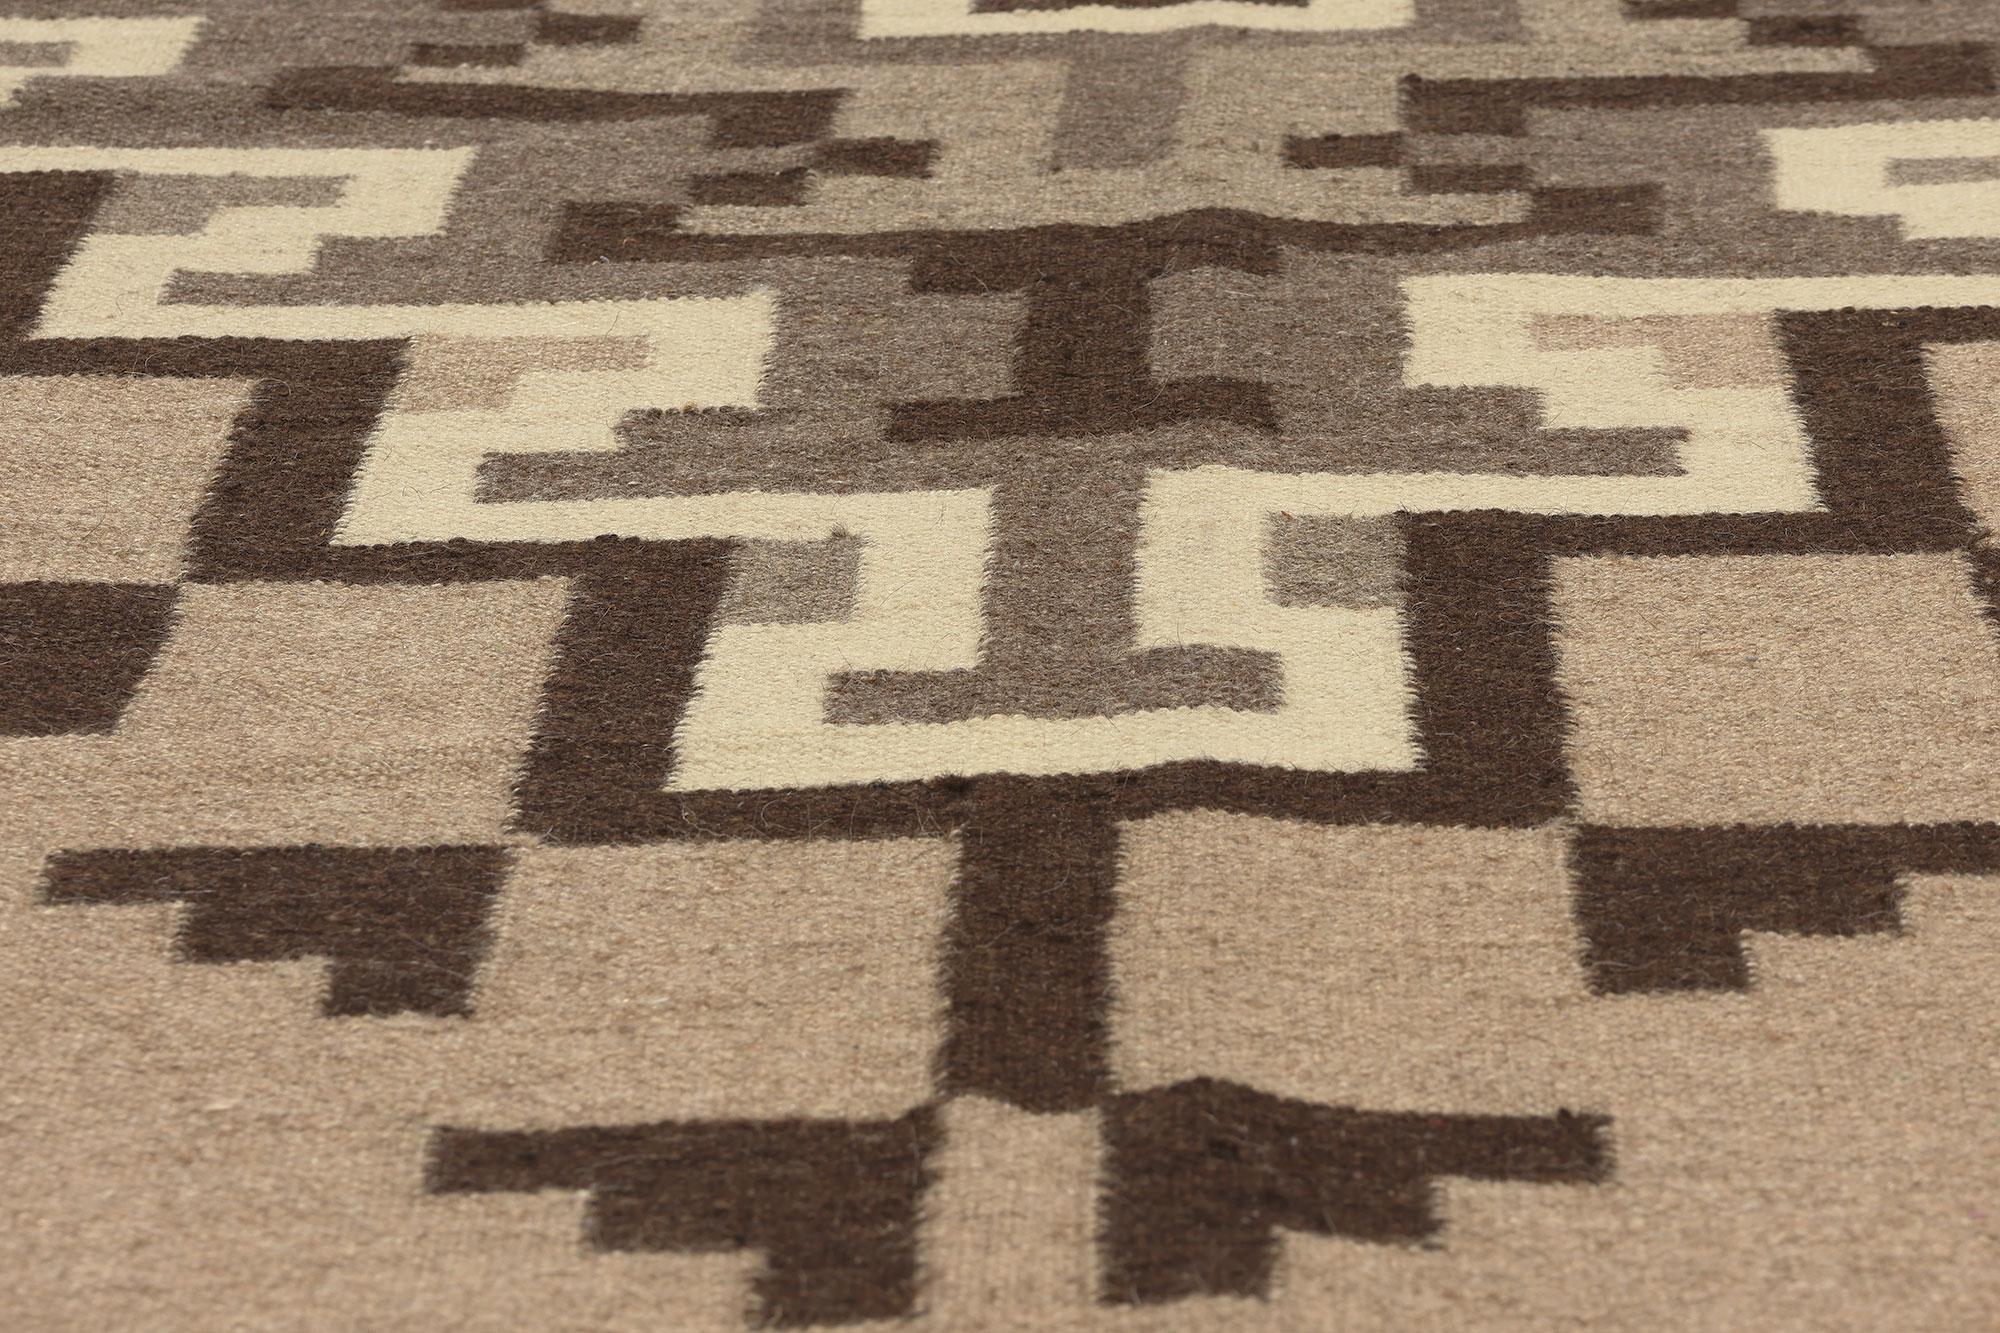 Contemporary Santa Fe Southwest Modern Two Grey Hills Navajo-Style Rug  In New Condition For Sale In Dallas, TX